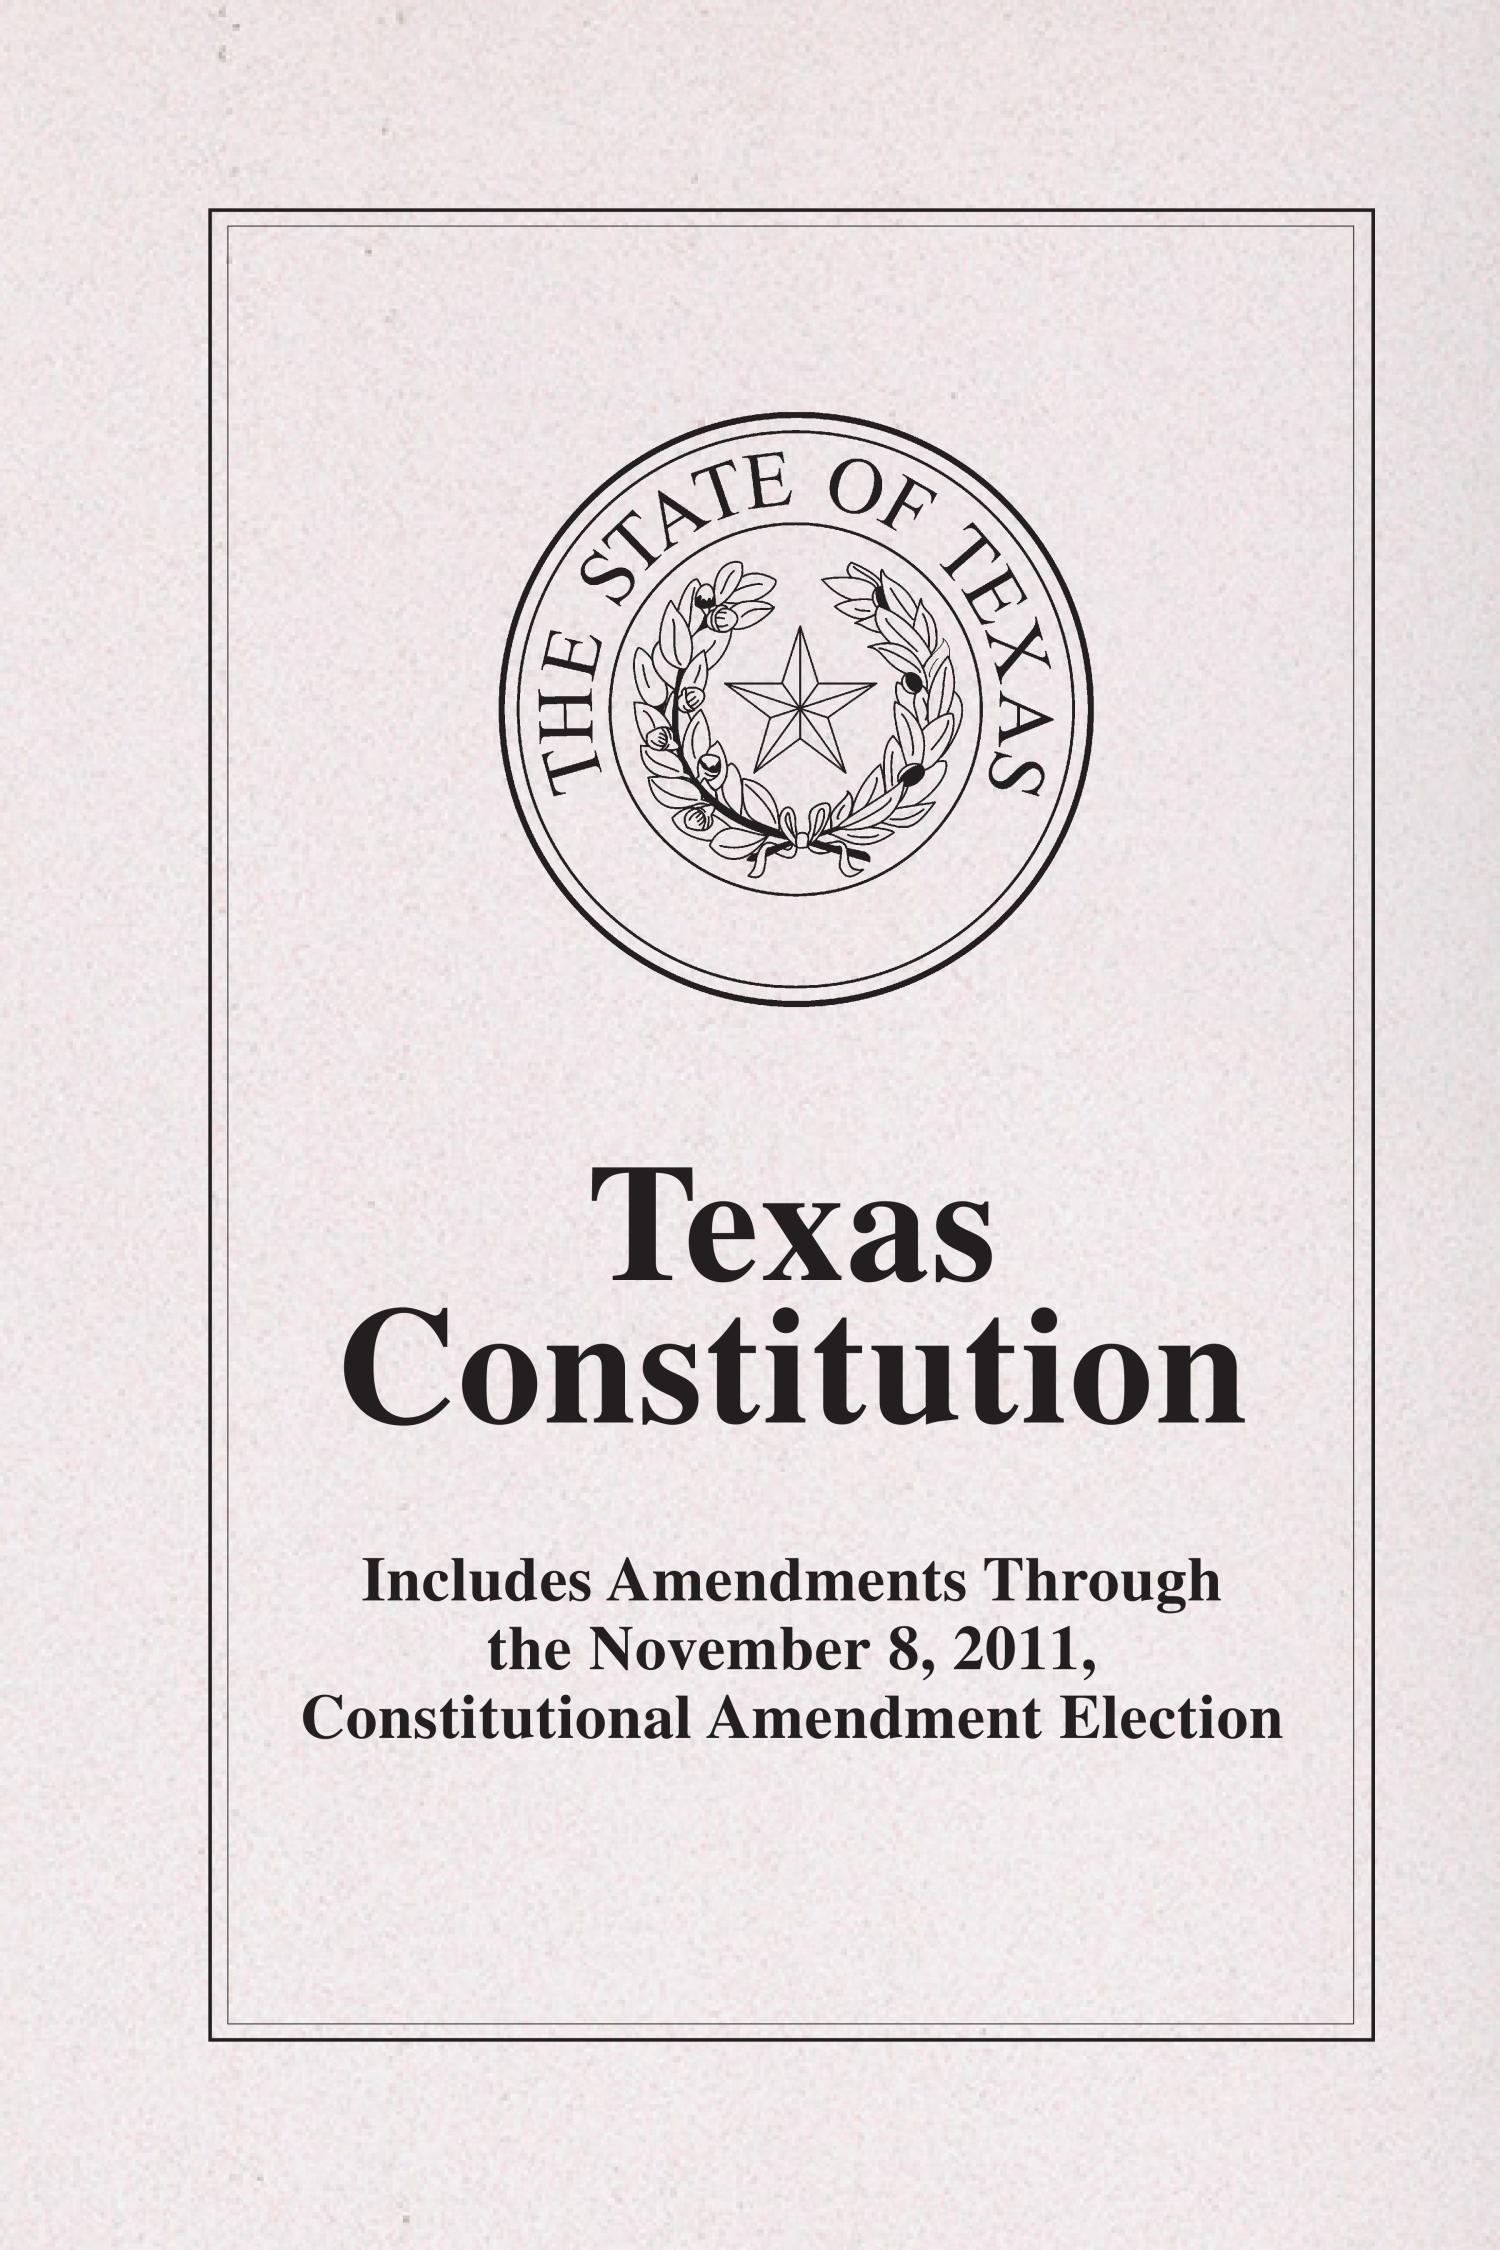 Texas Constitution
                                                
                                                    Front Cover
                                                